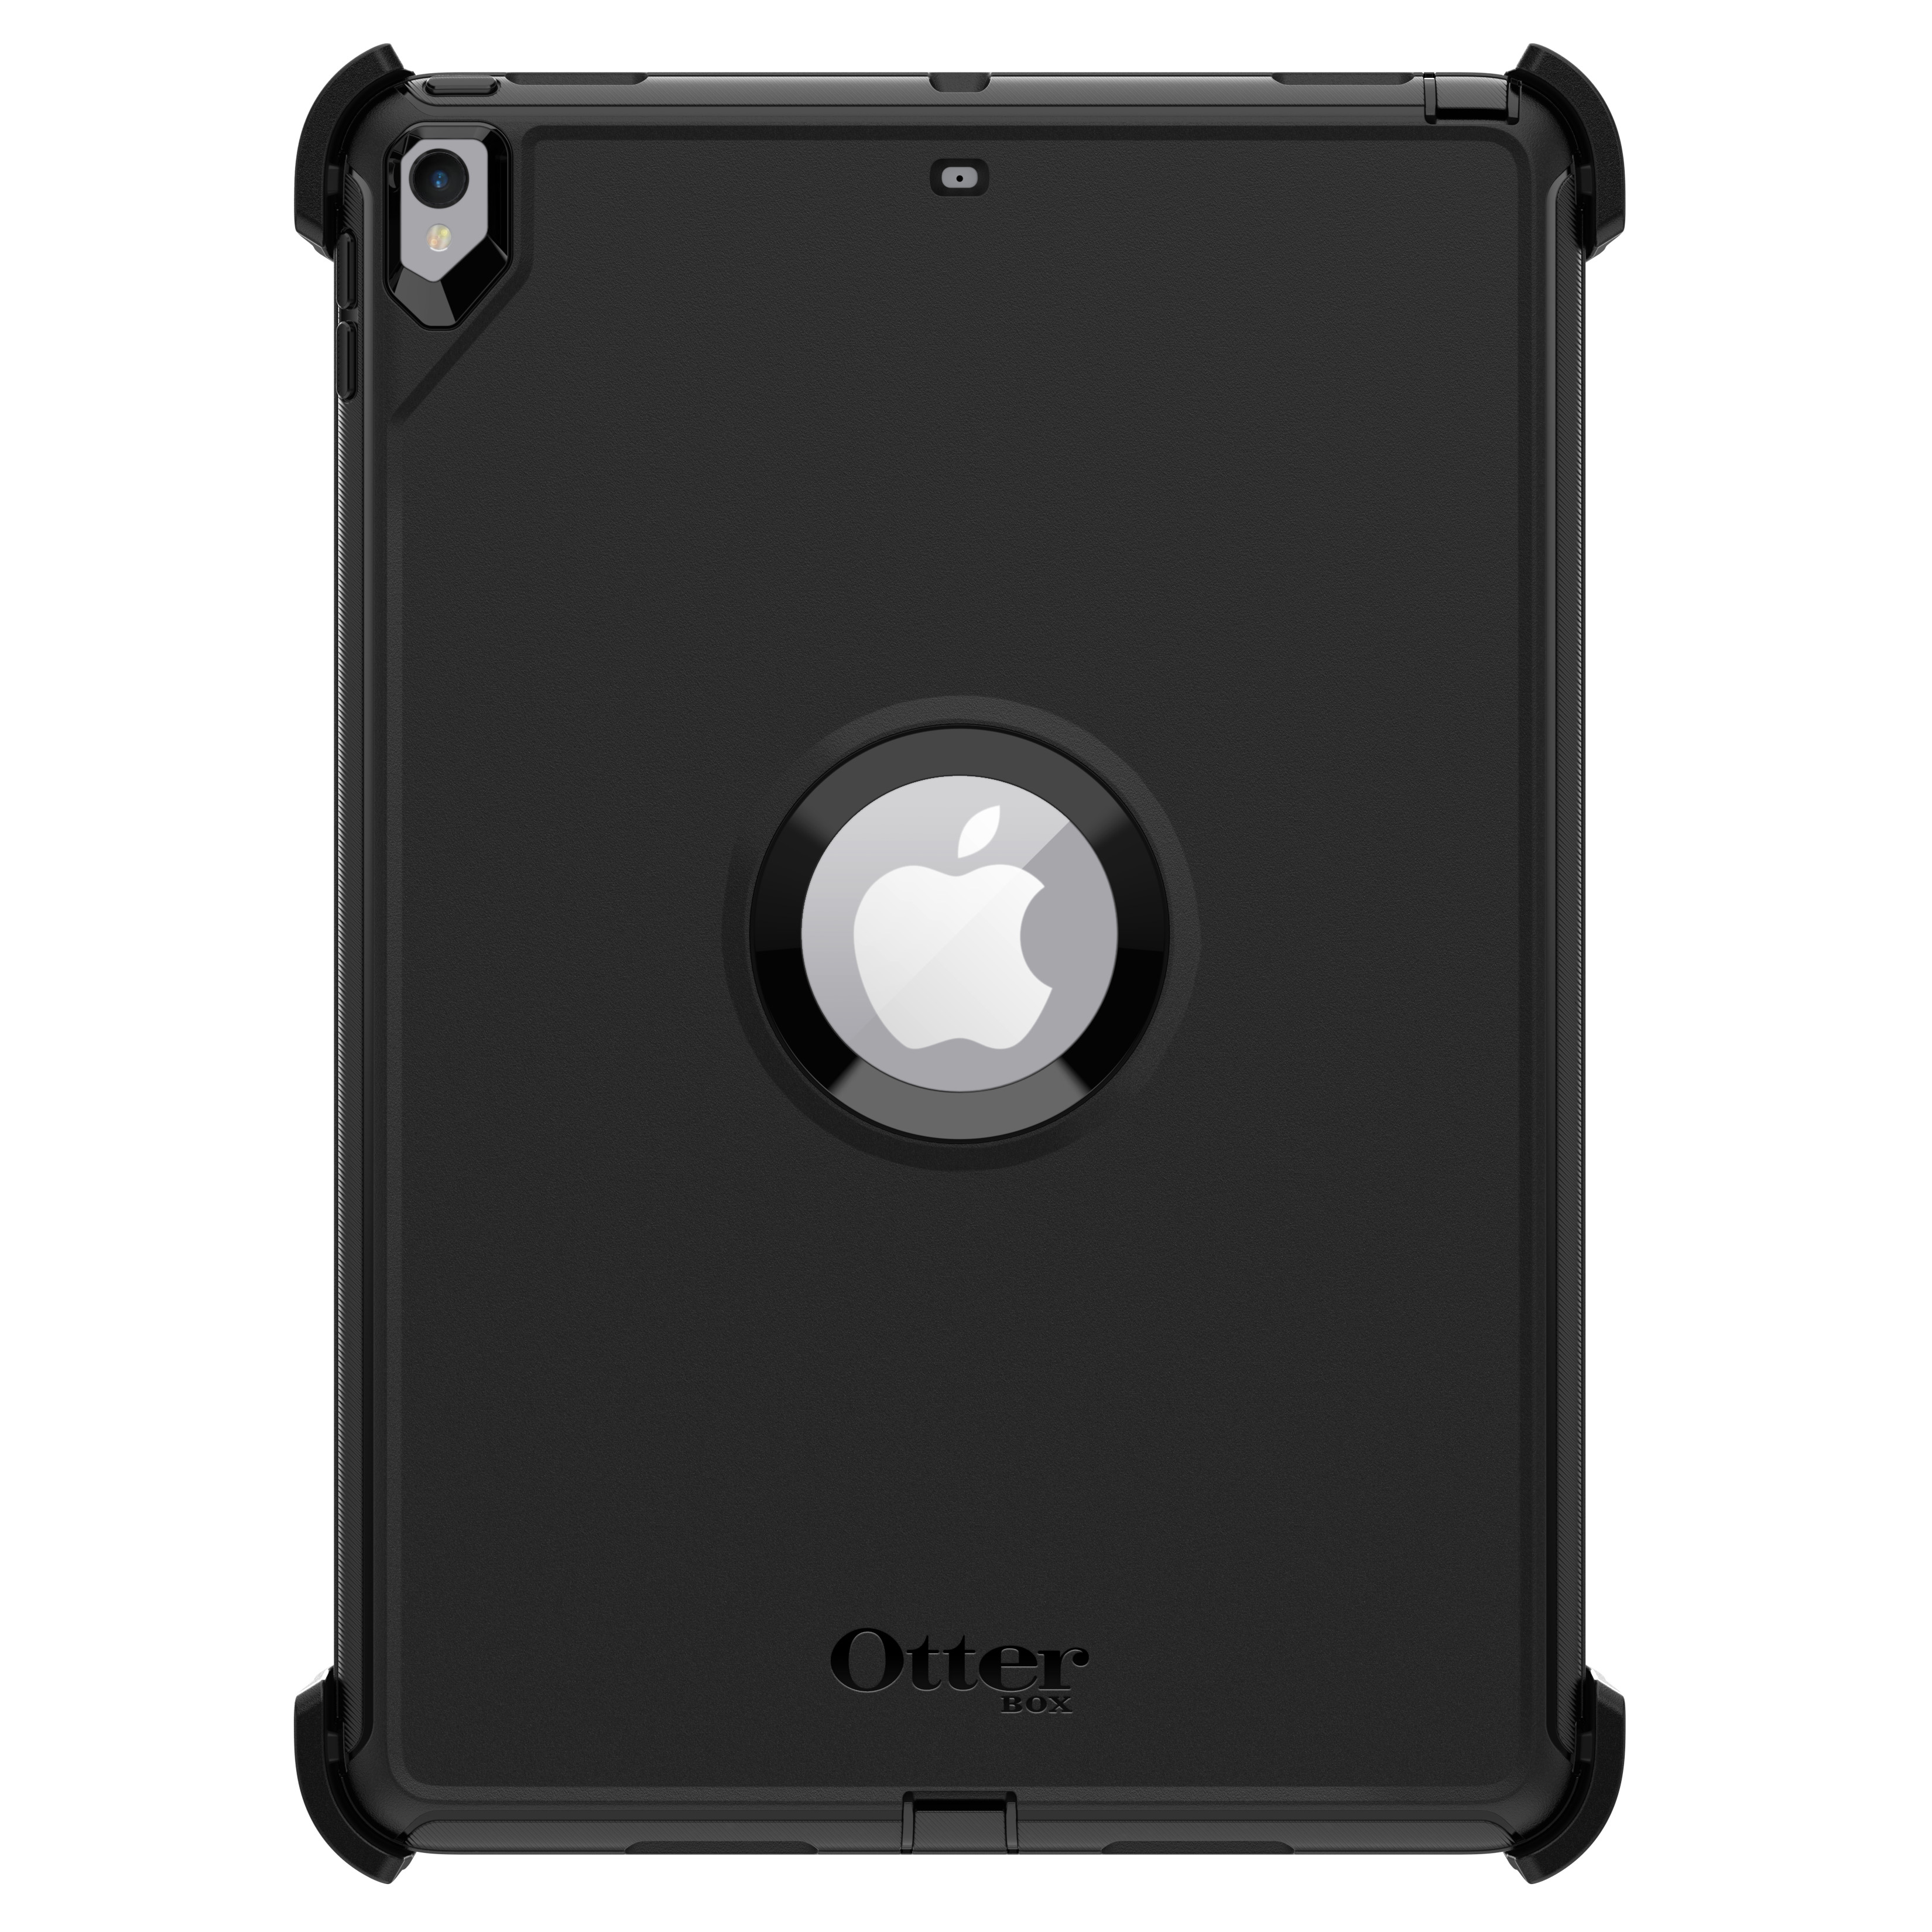 Otterbox - Defender Tablet Case for iPad Pro 10.5/Air (3rd gen), Black - image 3 of 10